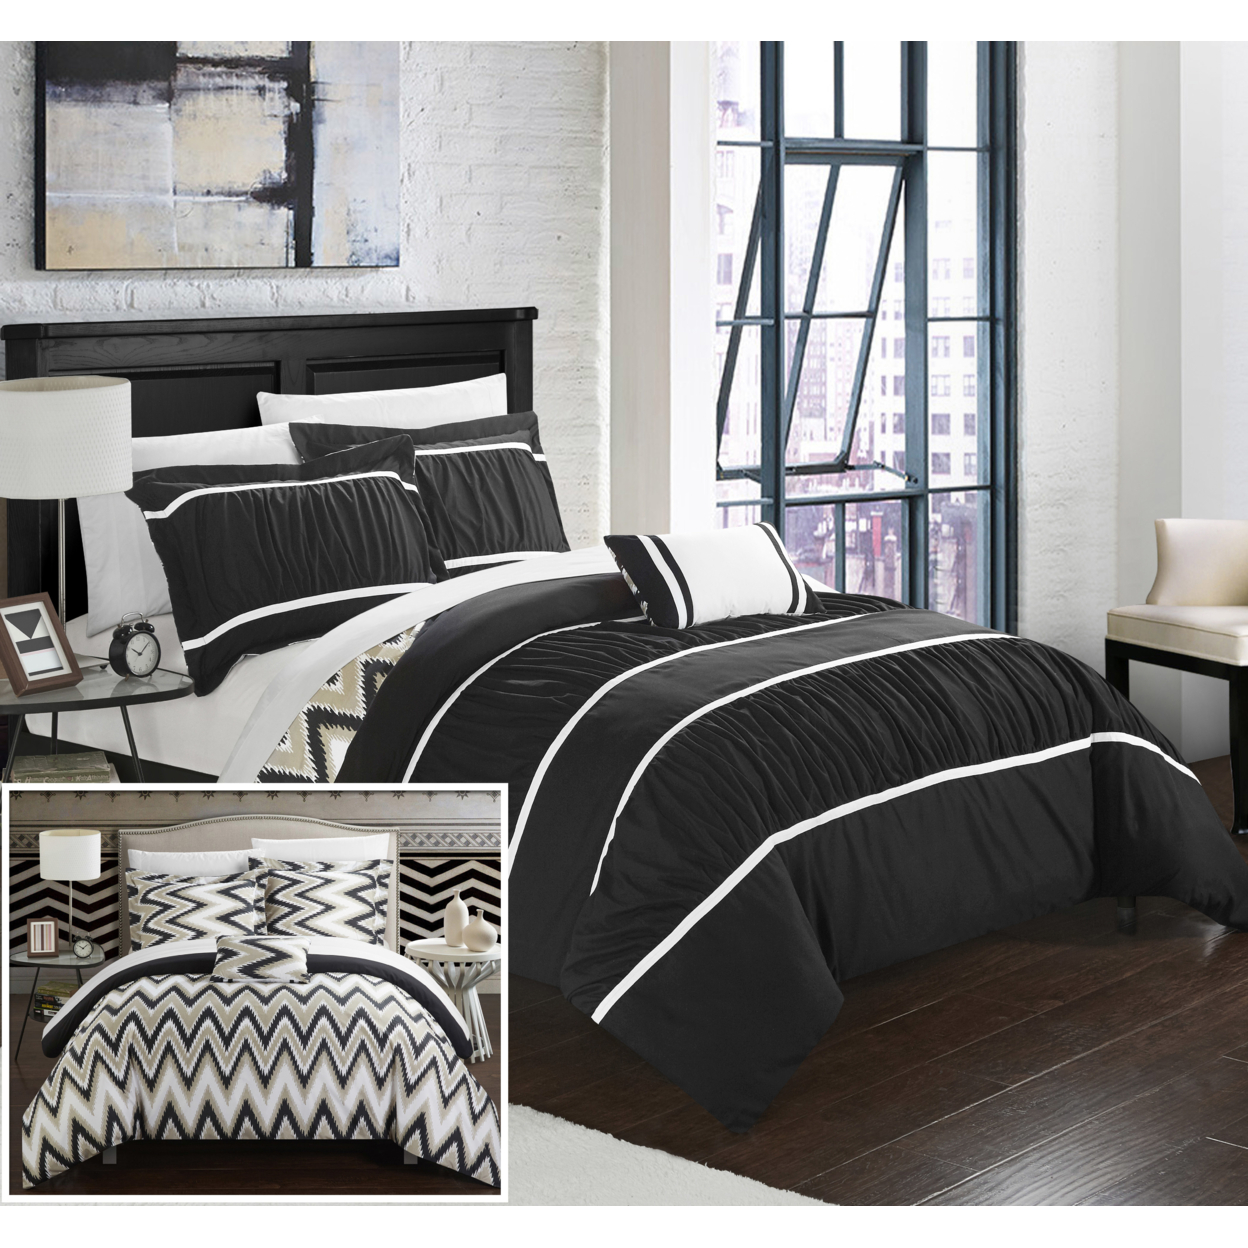 4 Or 3 Piece Lucia Pleated & Ruffled With Chevron REVERSIBLE Backing Comforter Set - Black, Full/Queen